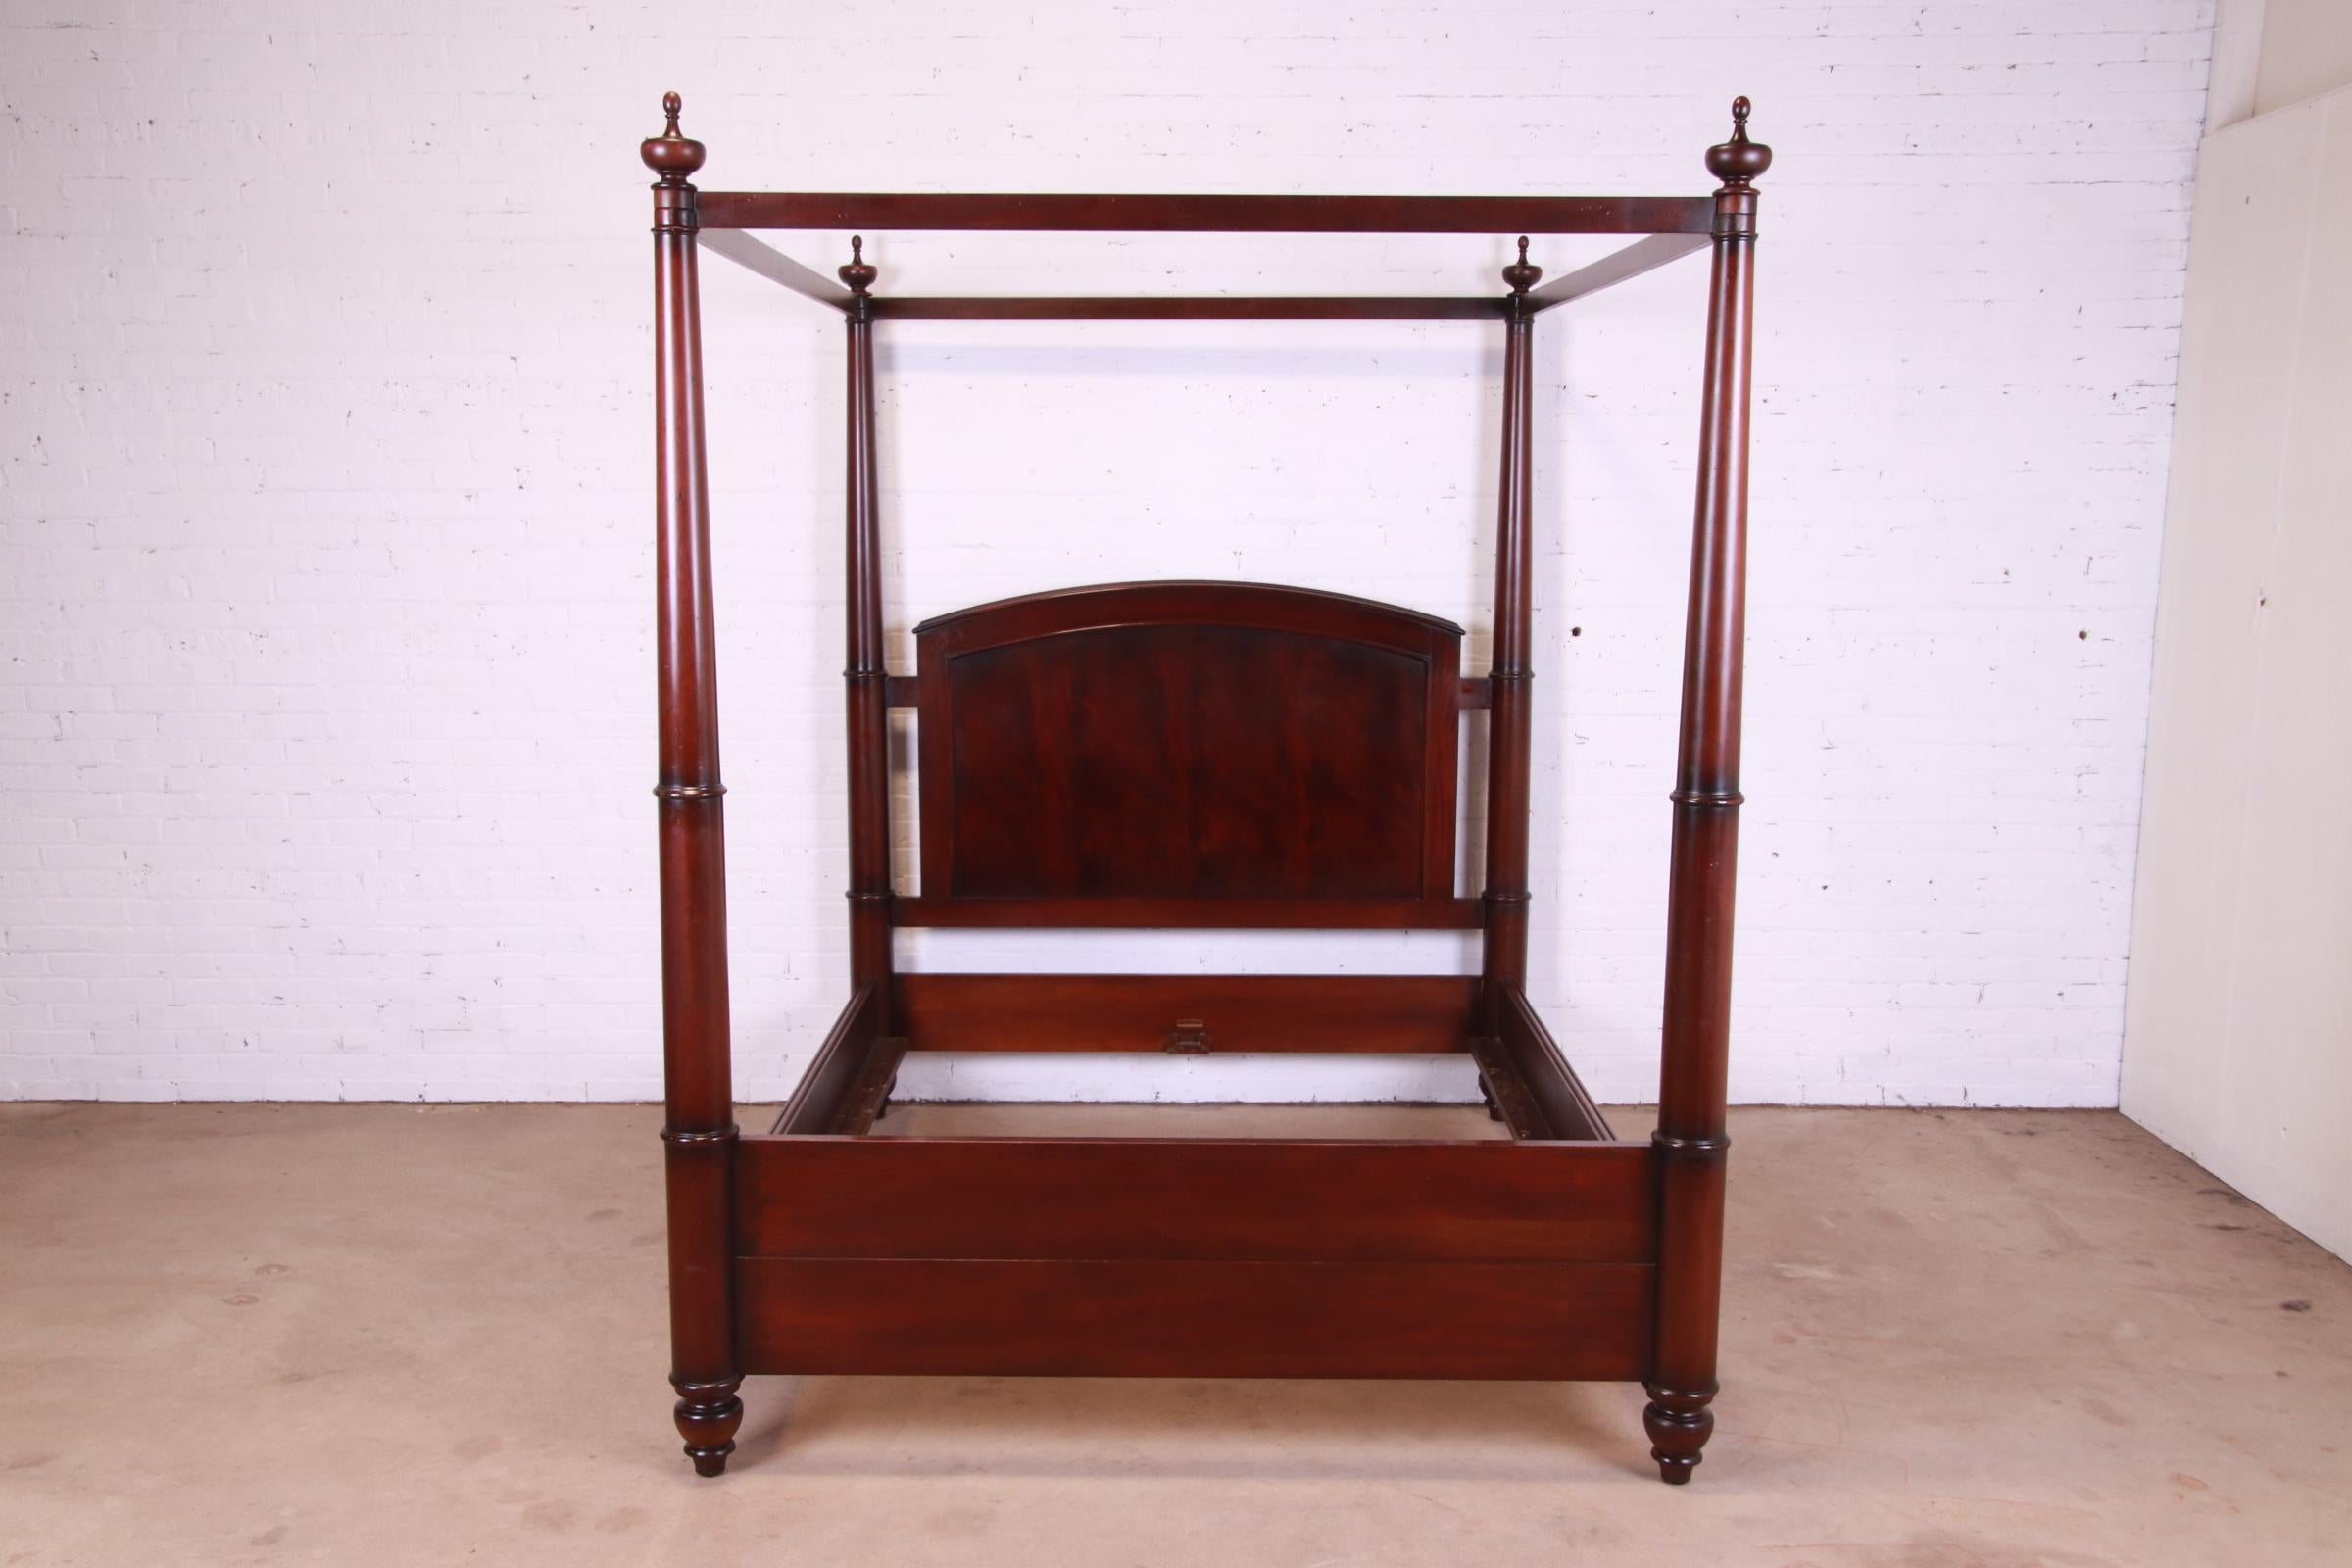 A gorgeous Georgian or Federal style mahogany four poster queen size tester bed

By Baker Furniture, 